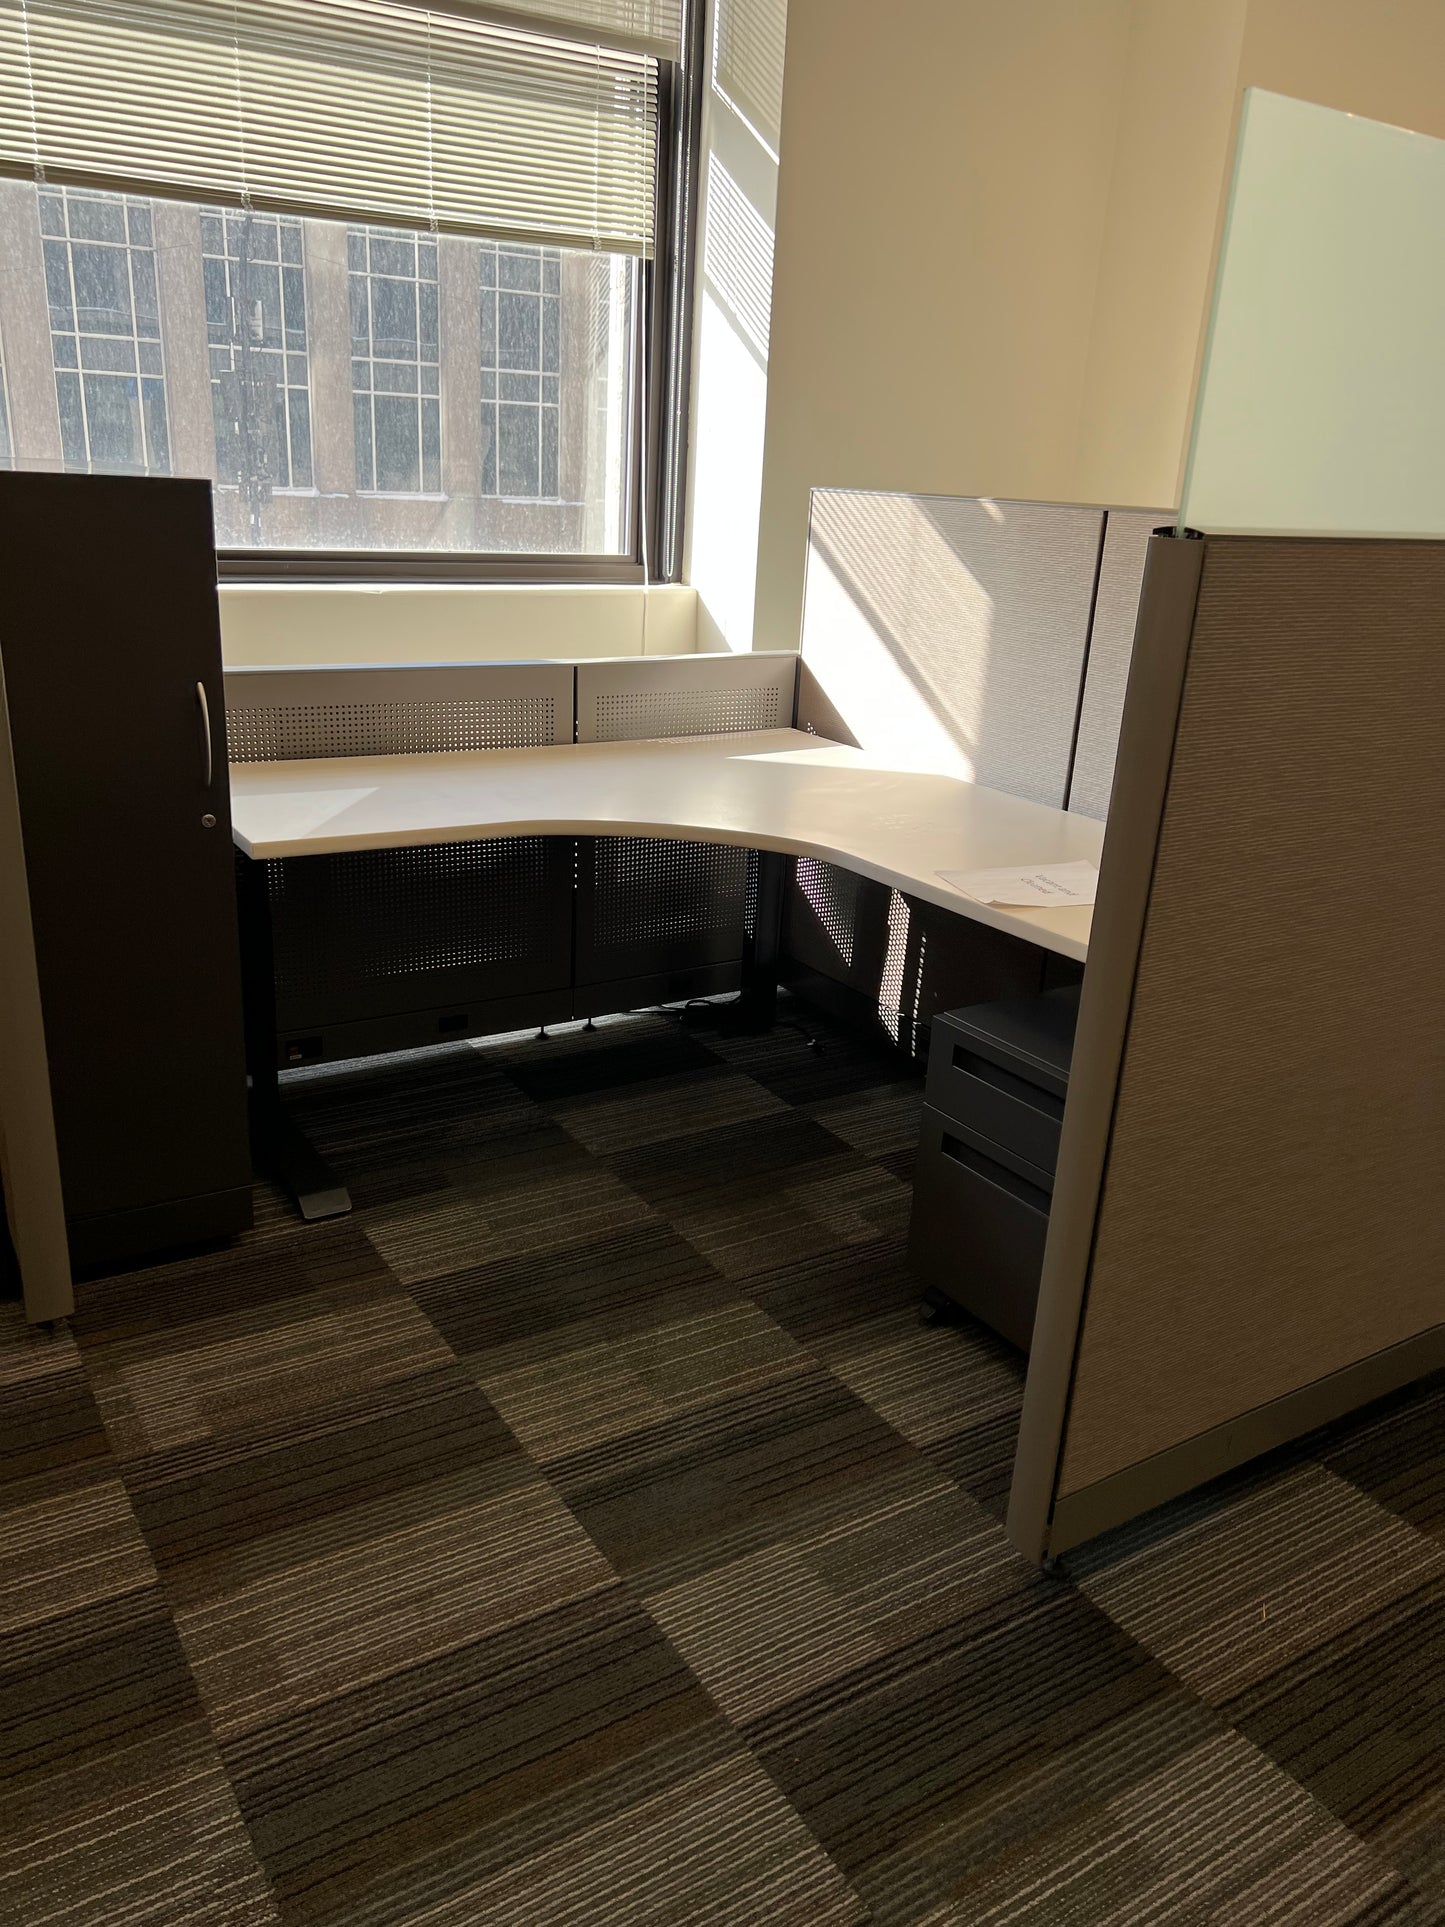 Photo of Allsteel Terrace cubicle system